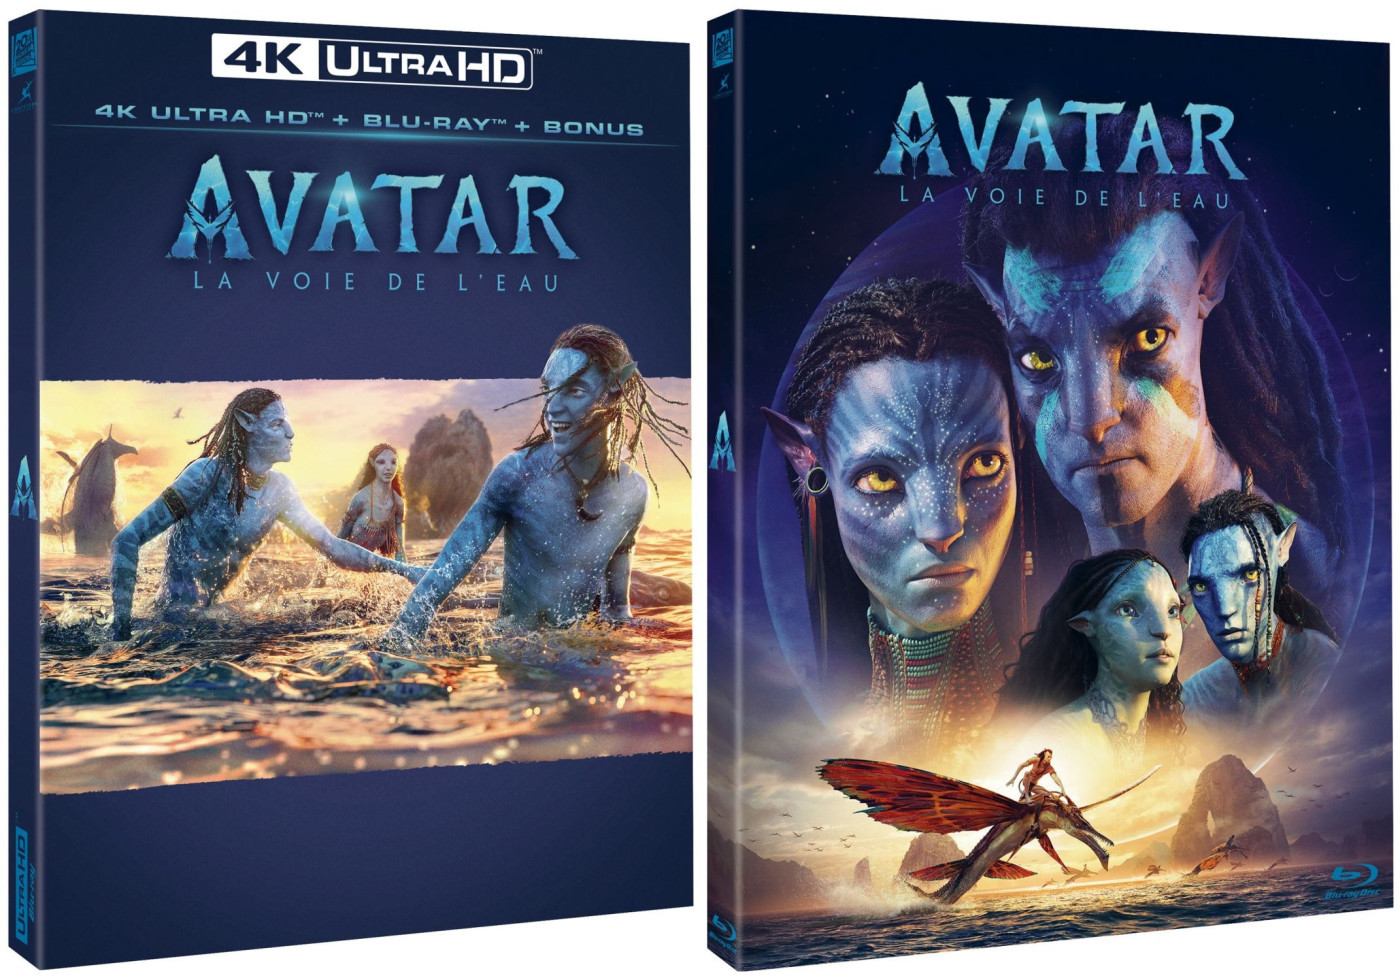 Avatar The Way of Water SteelBook in 4K Ultra HD Bluray at HD MOVIE SOURCE